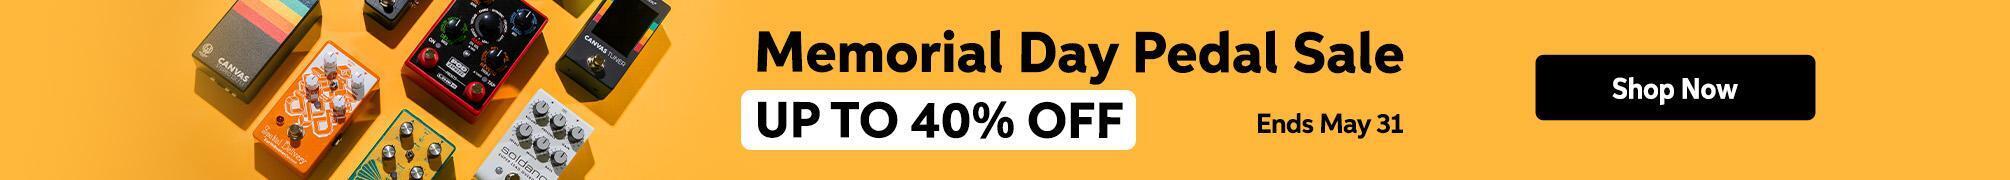 Memorial Day Pedal Sale, up to 40% off, ends May 31! Shop Now